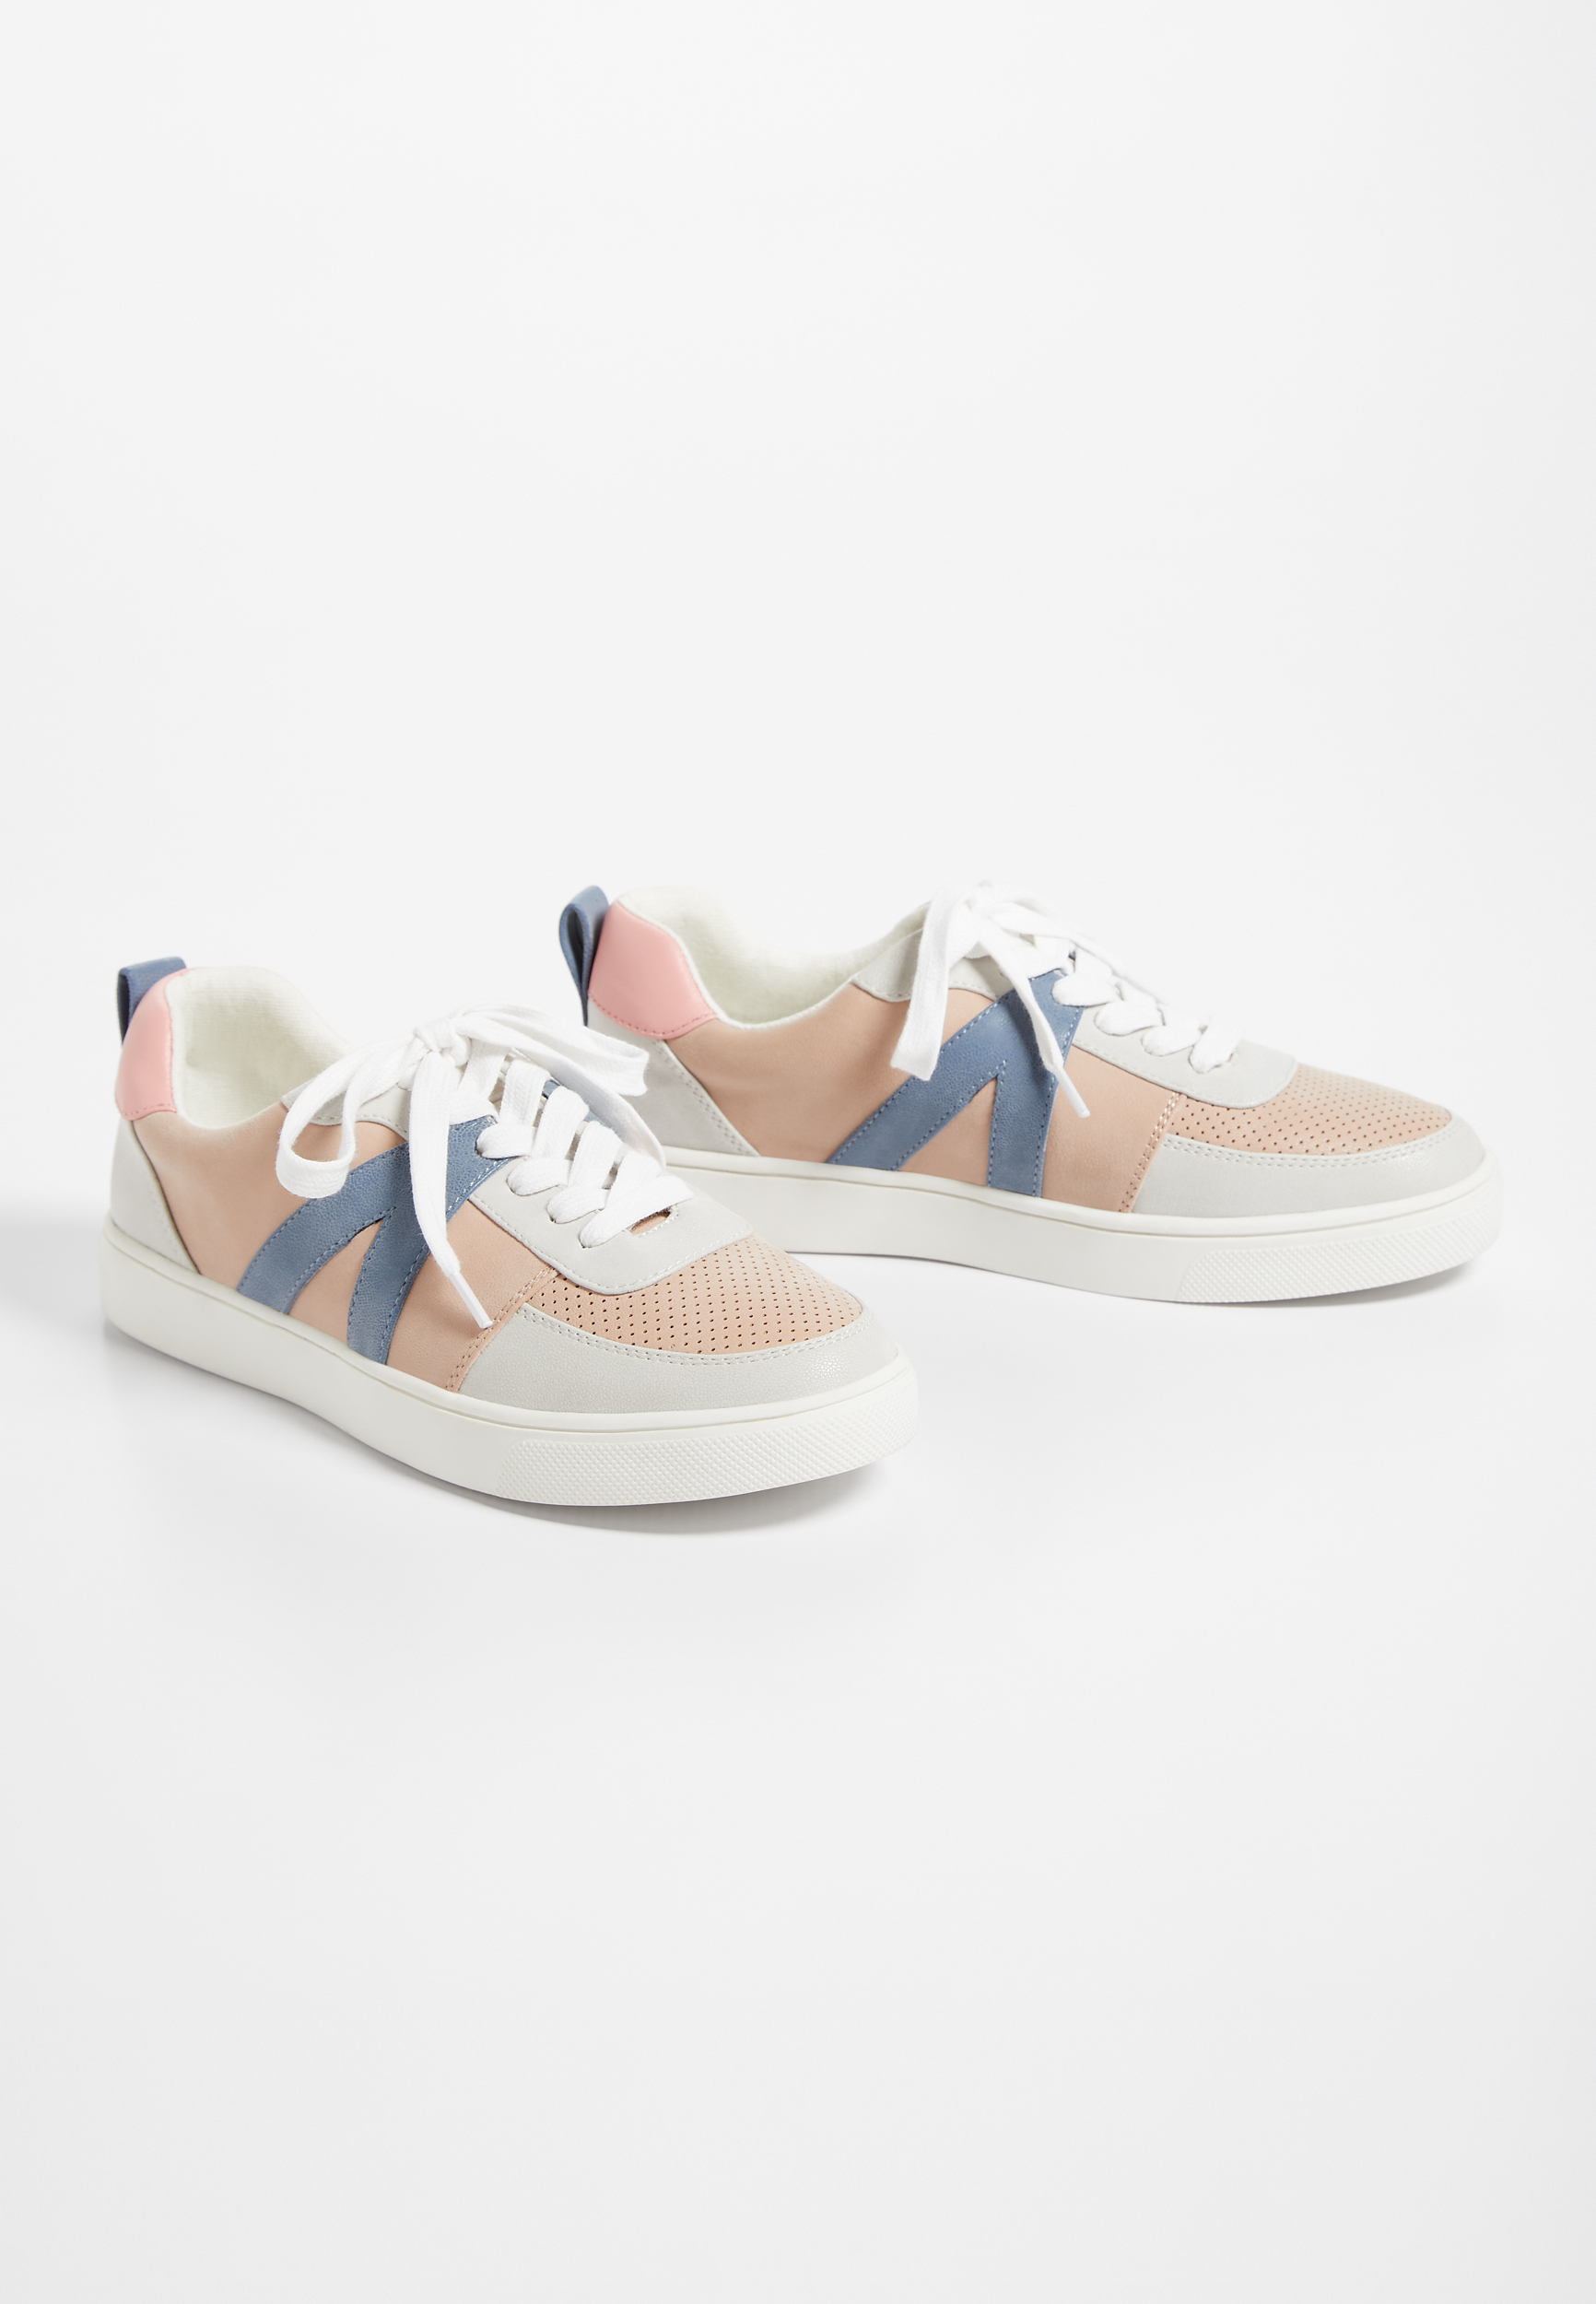 Shelby Blush Colorblock Lace Up Sneaker | maurices